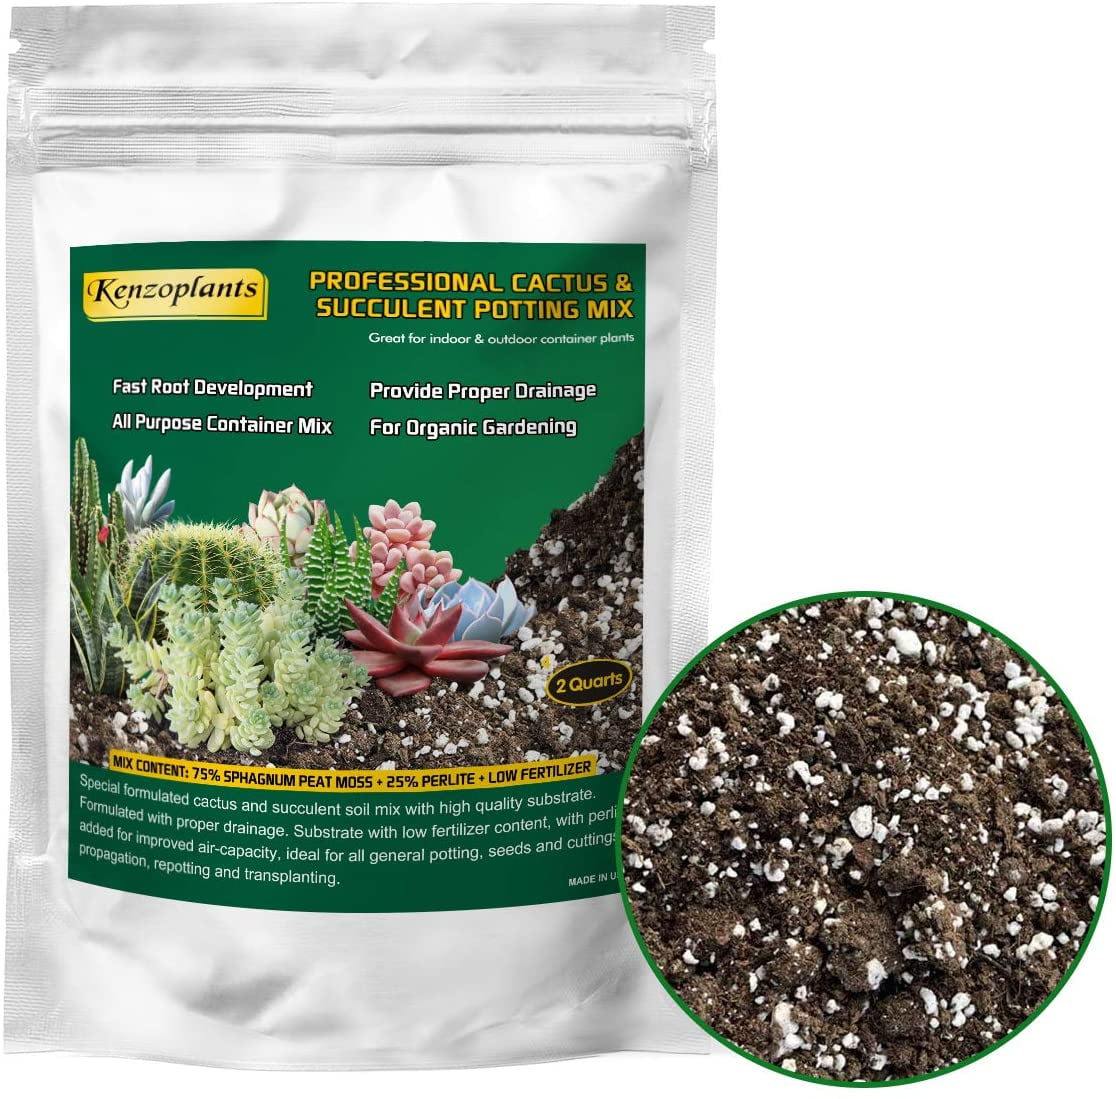 Organic Succulents and Cactus Soil Mix, Professional Potting Soil, Fast Draining Pre-Mixed Blend, Small Bag Garden Soil for Indoor Plants, Aloe Vera, Snake Plant, Spider Plant, ZZ Plants, 2 Quarts image